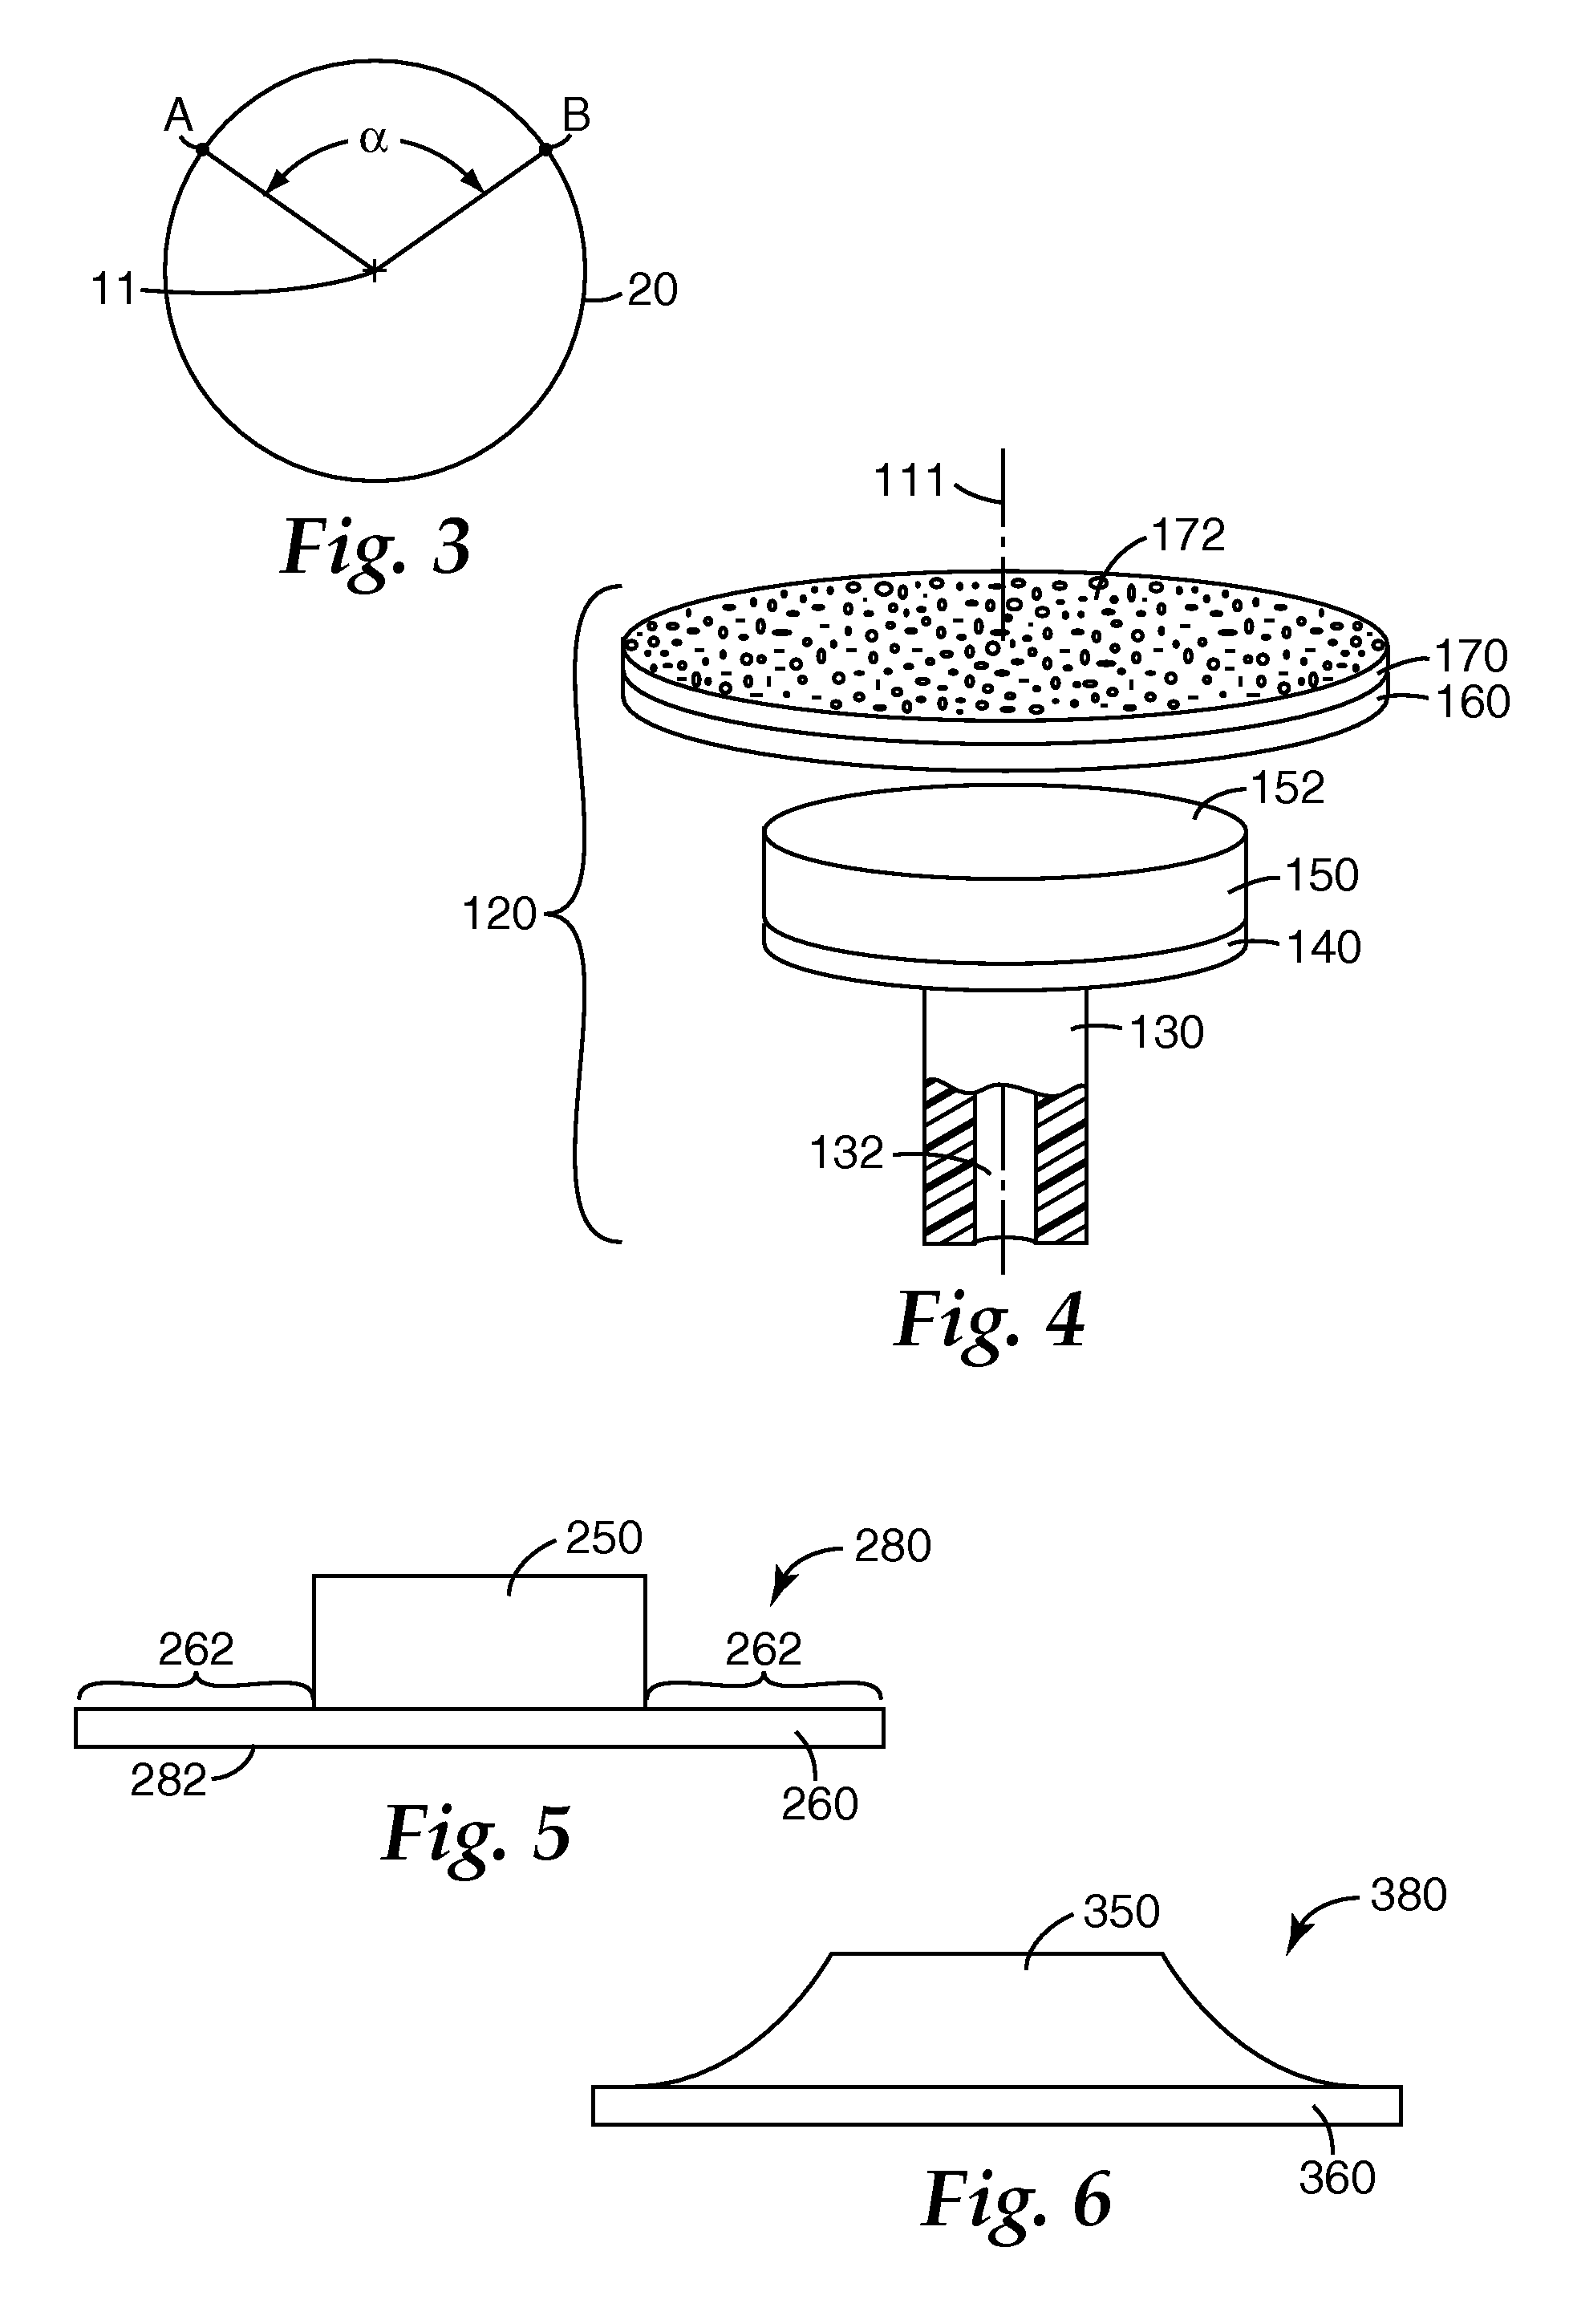 Methods of removing defects in surfaces